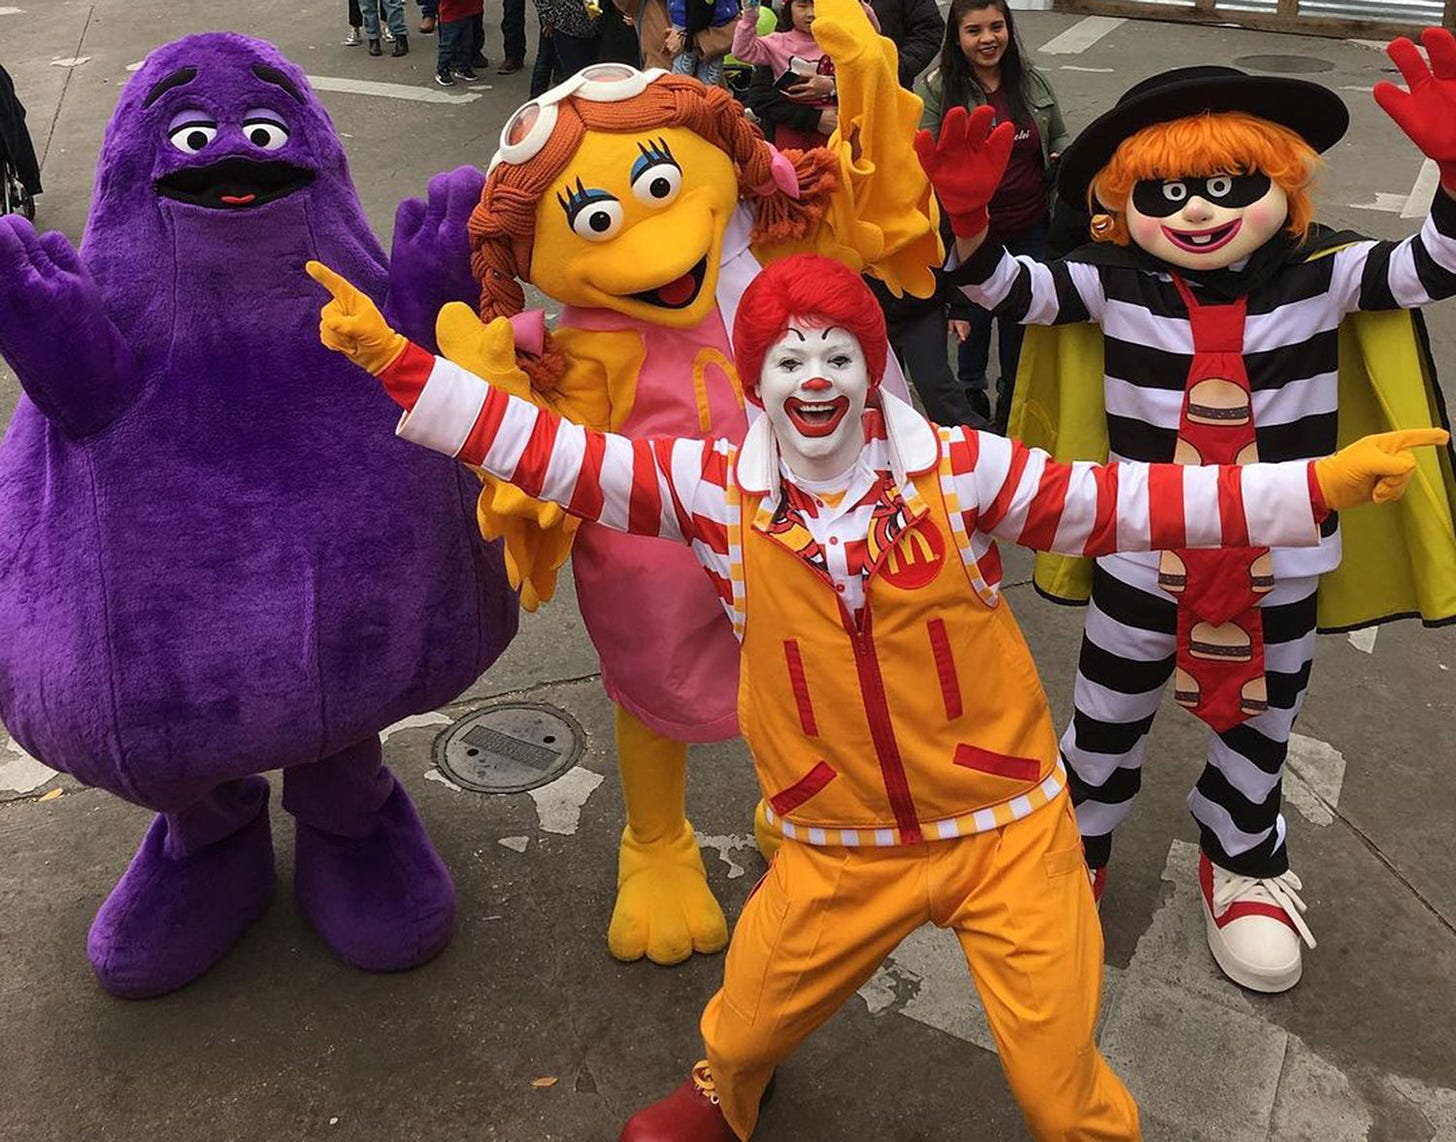 What Is Grimace? McDonald's Manager Clarifies Character's | PEOPLE.com